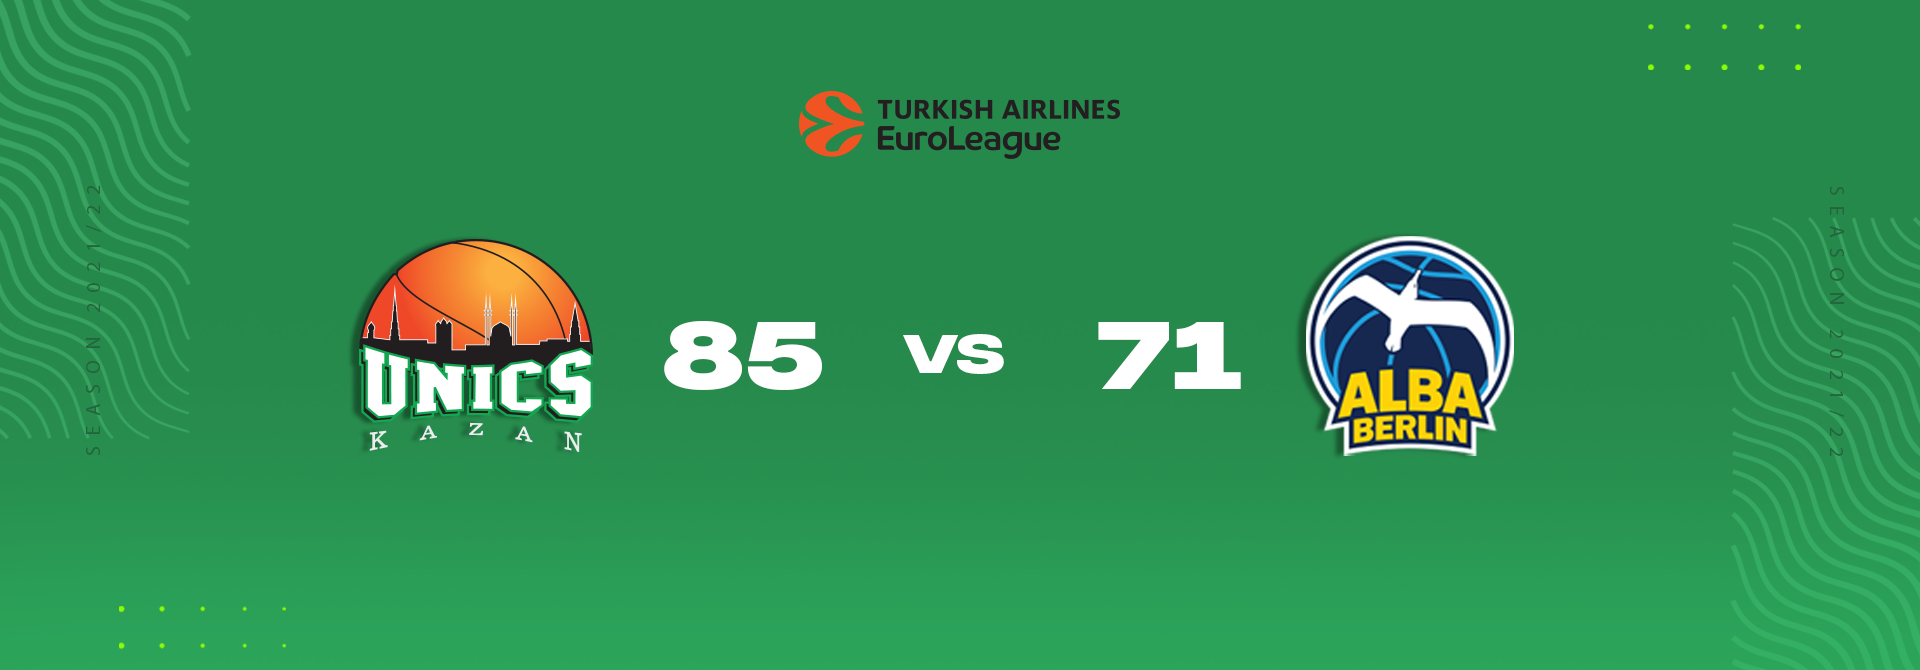 Continued our winning streak in the Euroleague